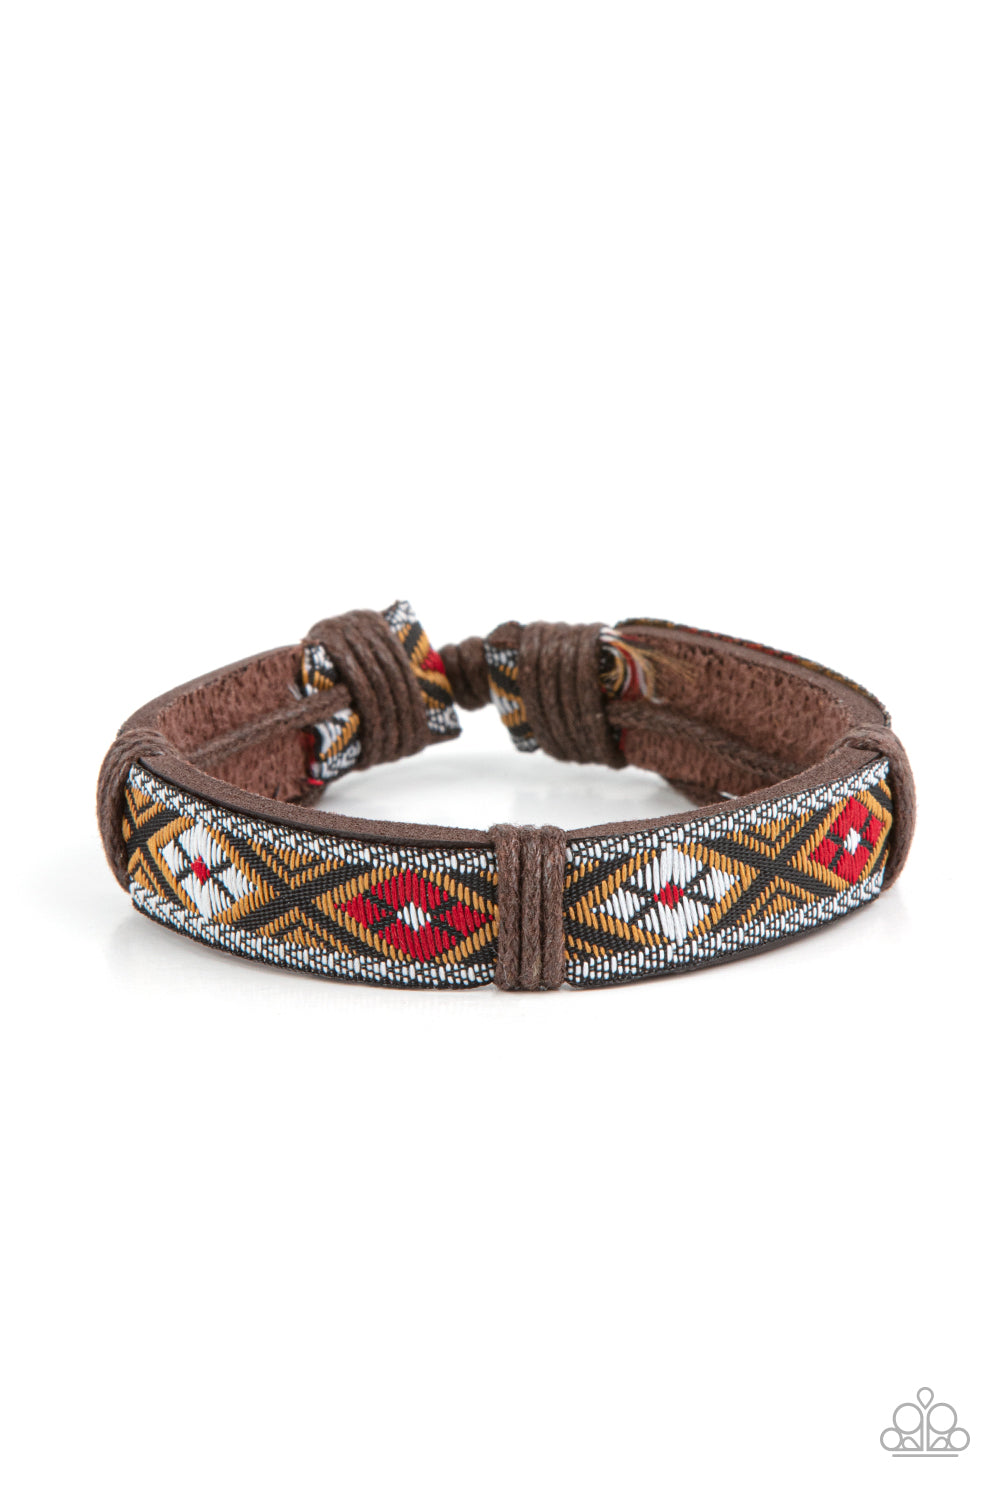 Textile Takeover Red Urban Bracelet - Paparazzi Accessories  A ribbon featuring a floral red, brown, black, and white textile print is knotted in place across the front of a brown leather band, creating a simply seasonal style around the wrist. Features an adjustable sliding knot closure.  Sold as one individual bracelet.